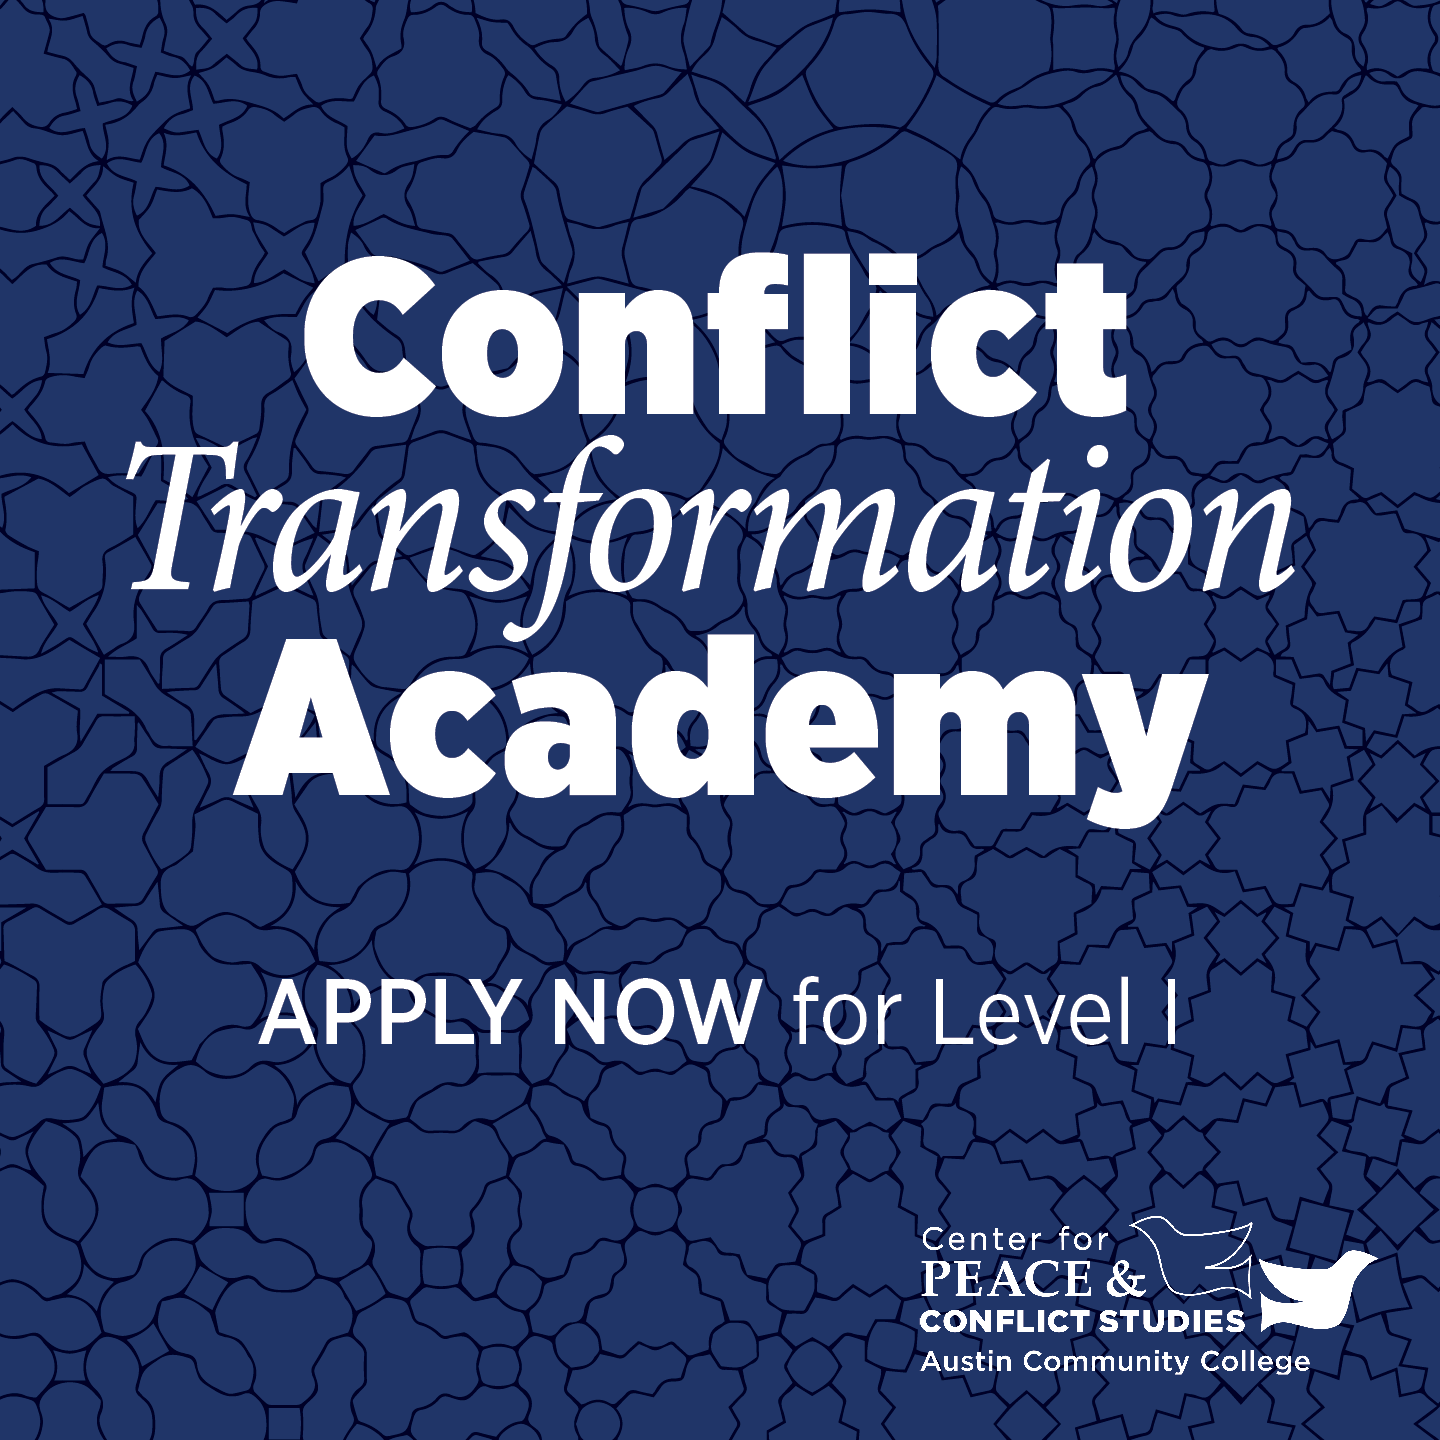 Conflict Transformation Academy level 1